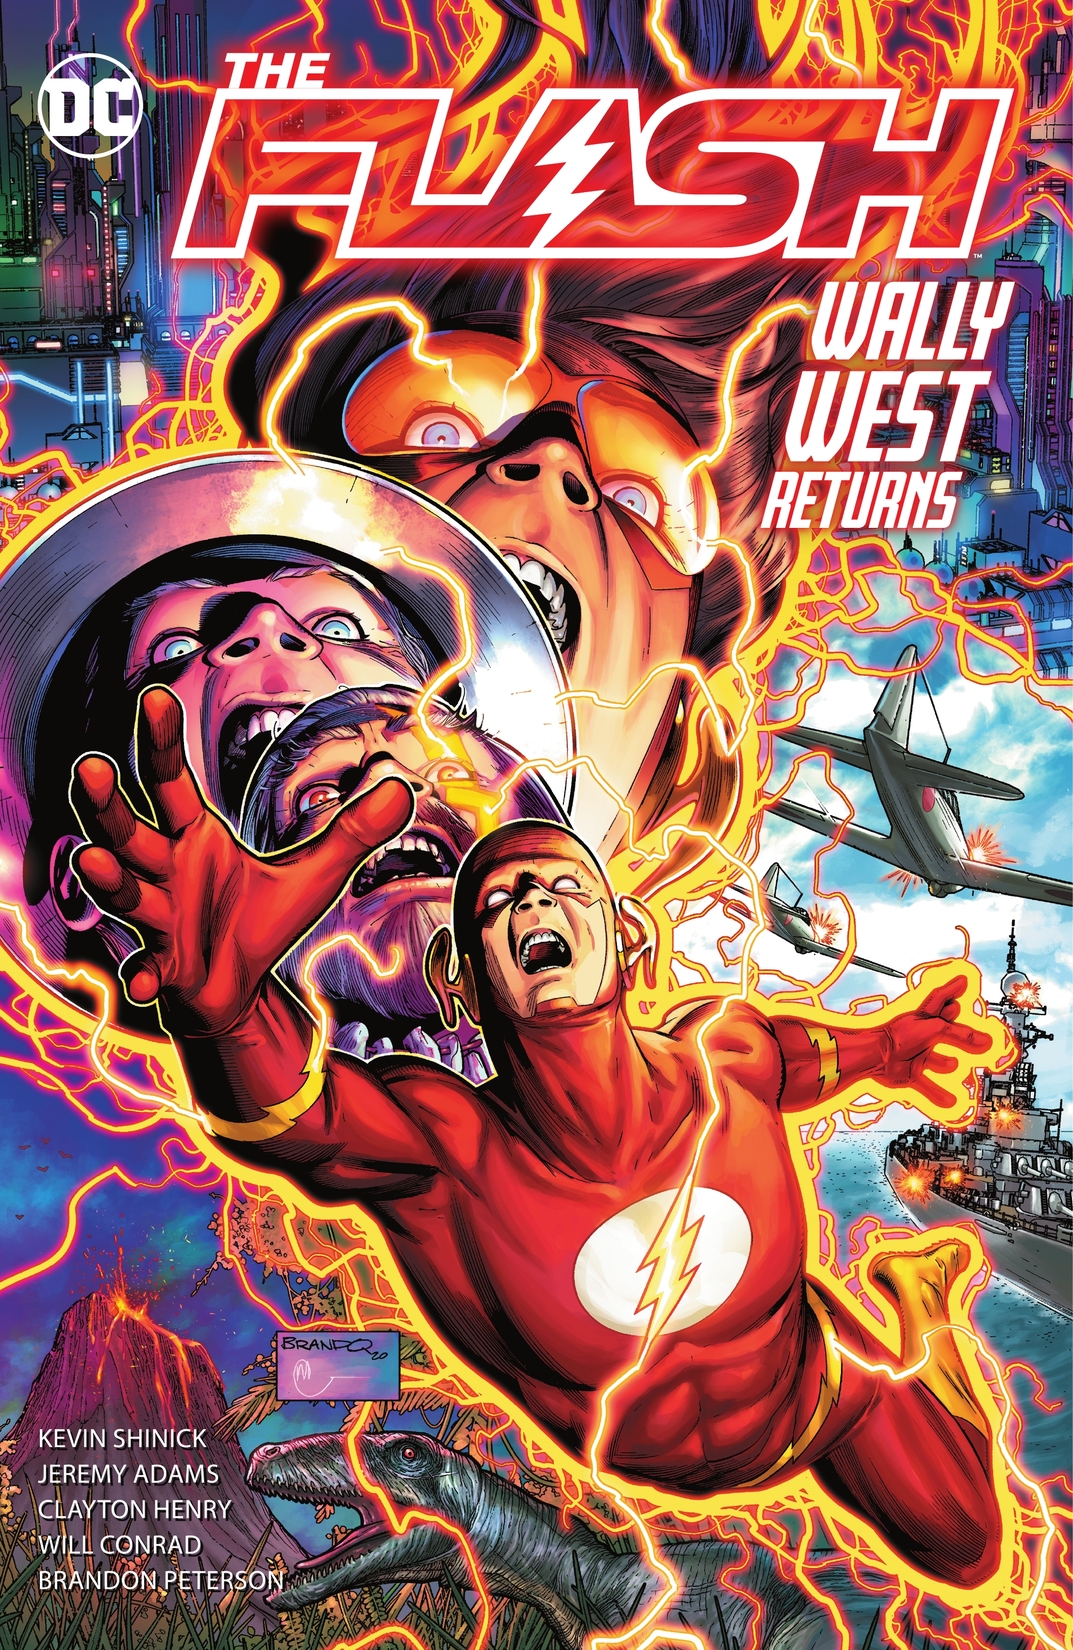 The Flash Vol. 16: Wally West Returns preview images